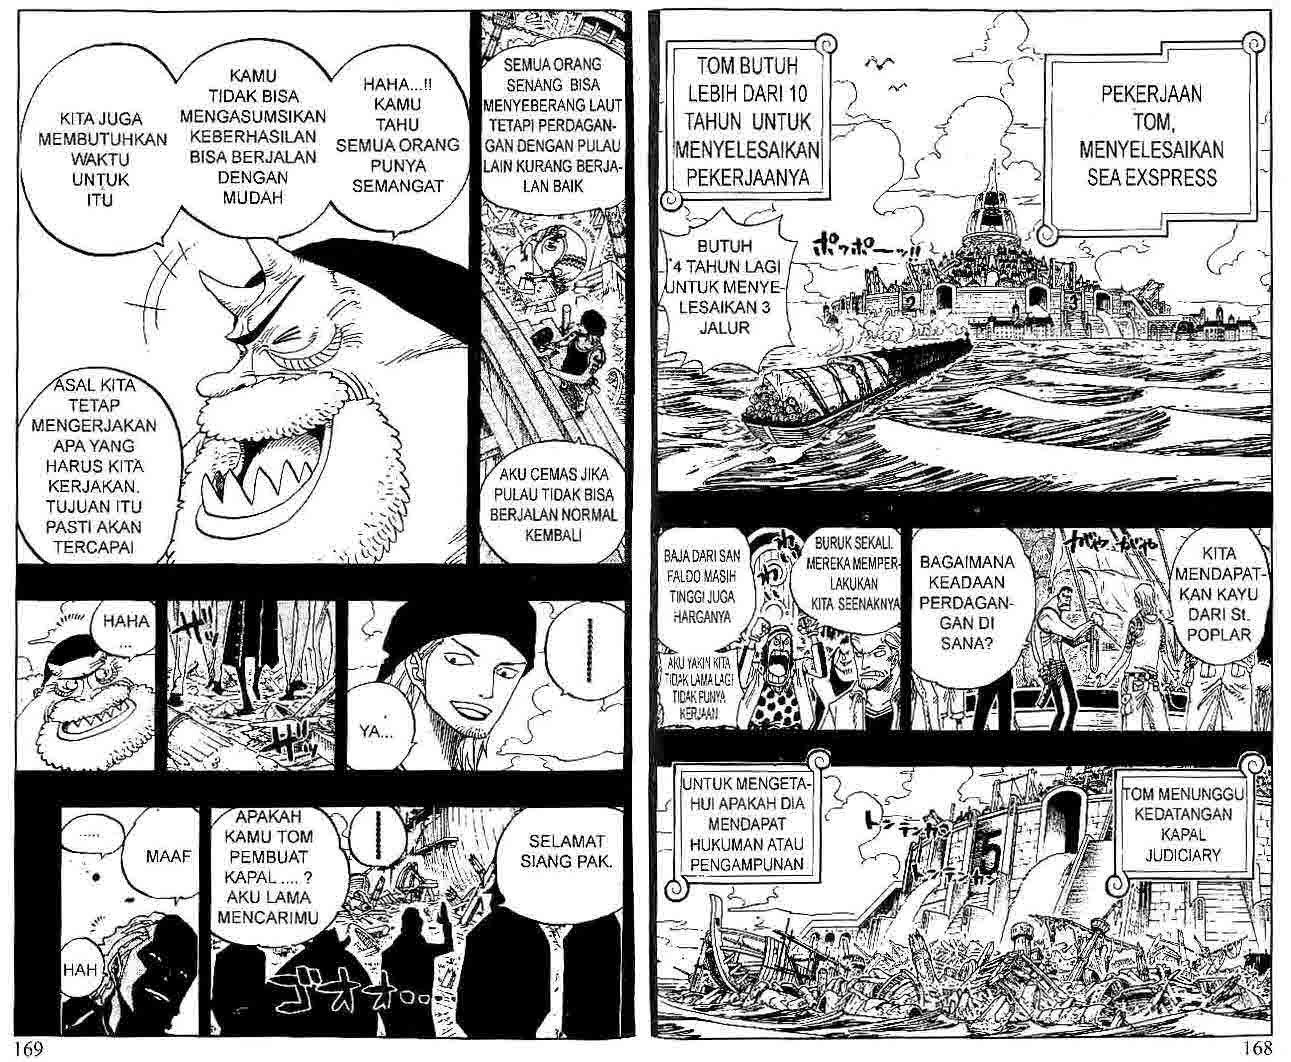 One Piece Chapter 355